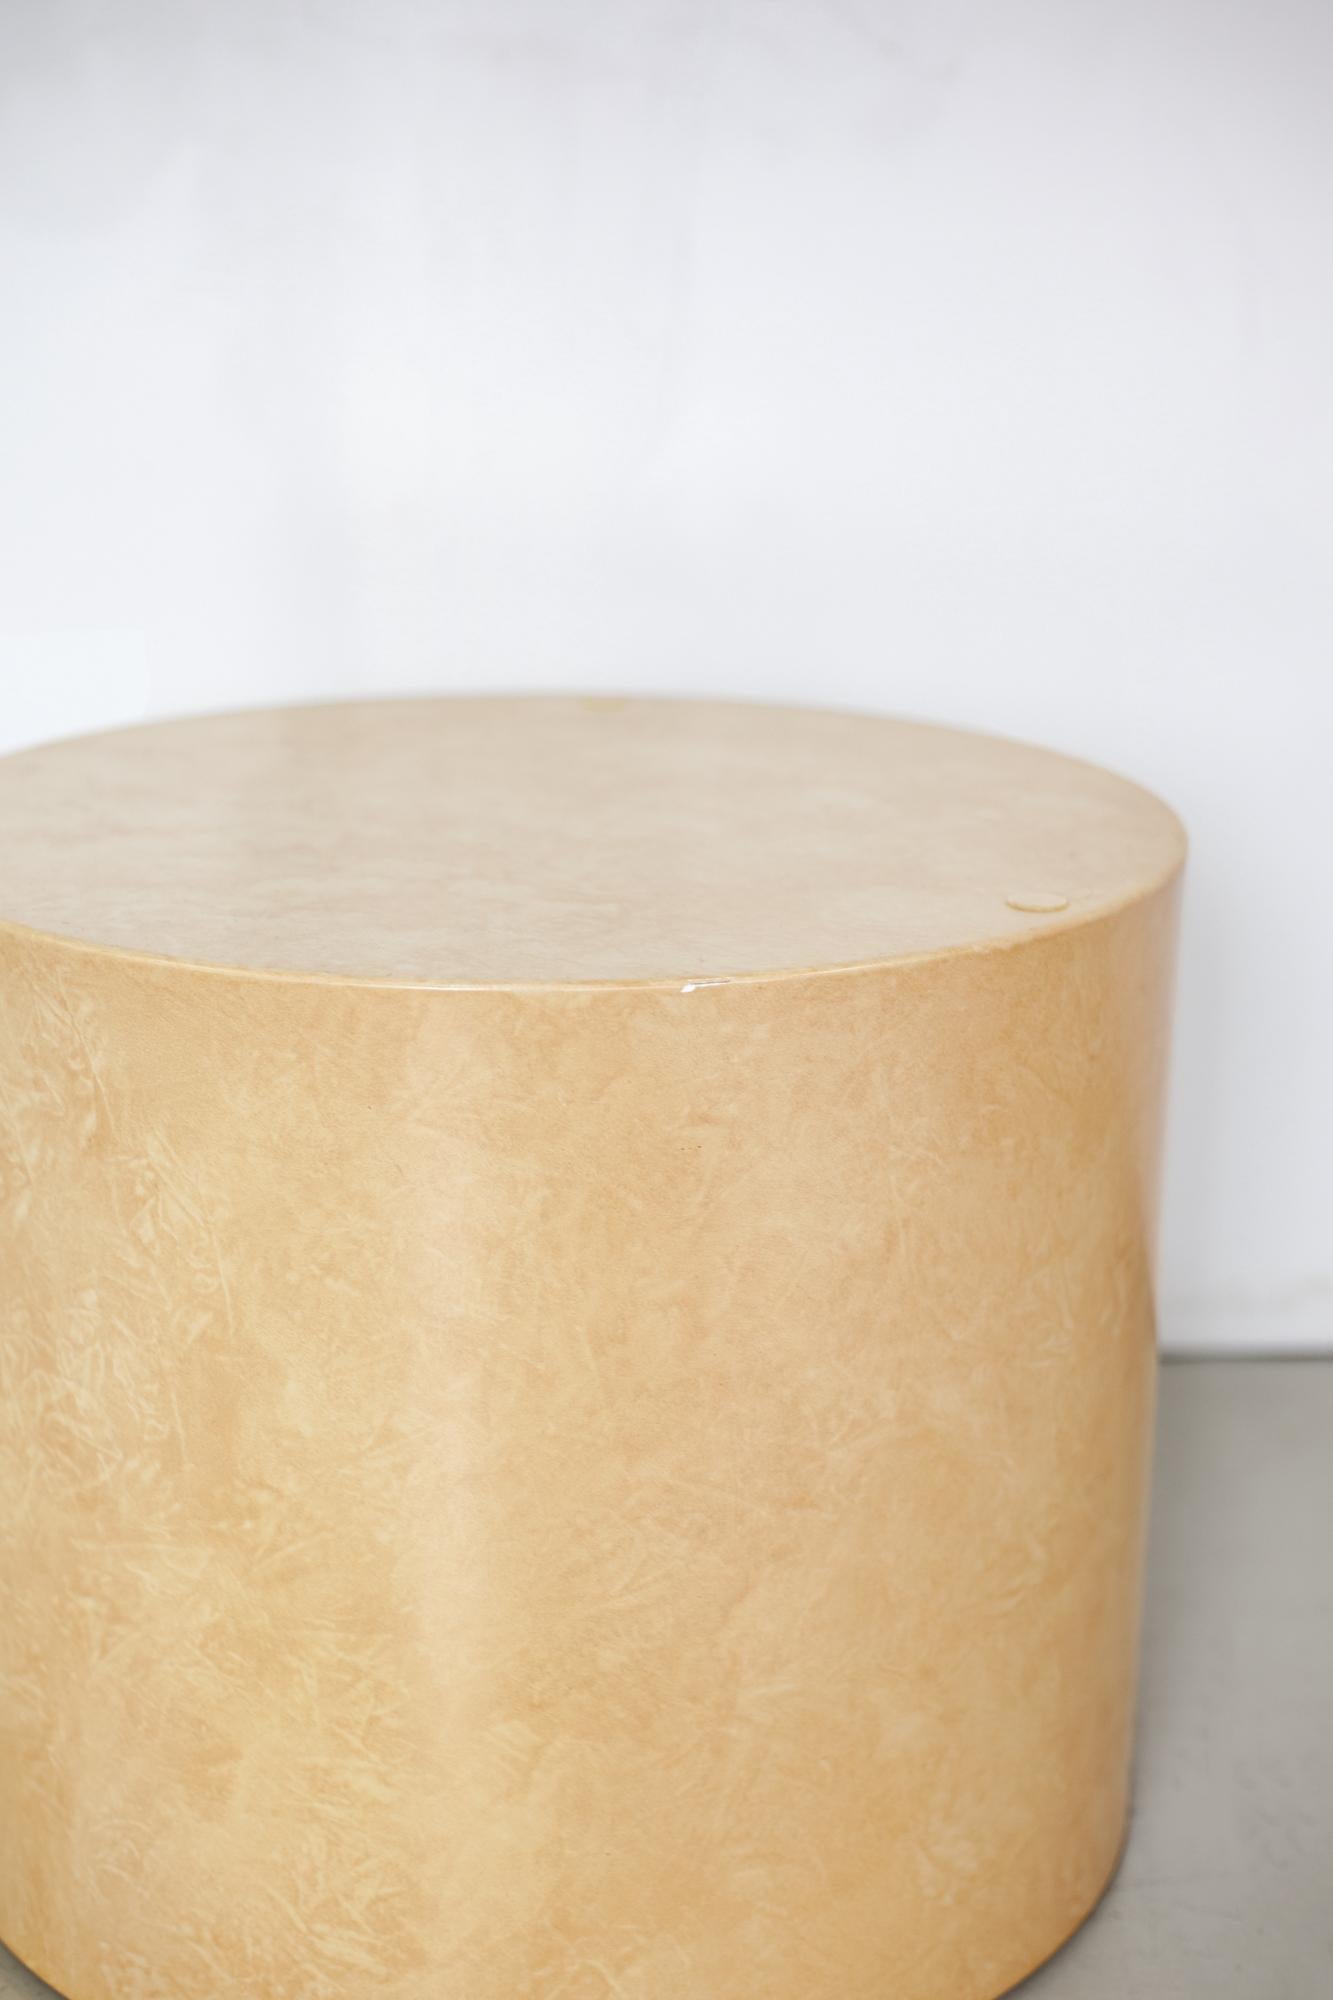 Paul Mayen for Intrex Burl Finish Coffee Table Base In Good Condition For Sale In Brooklyn, NY